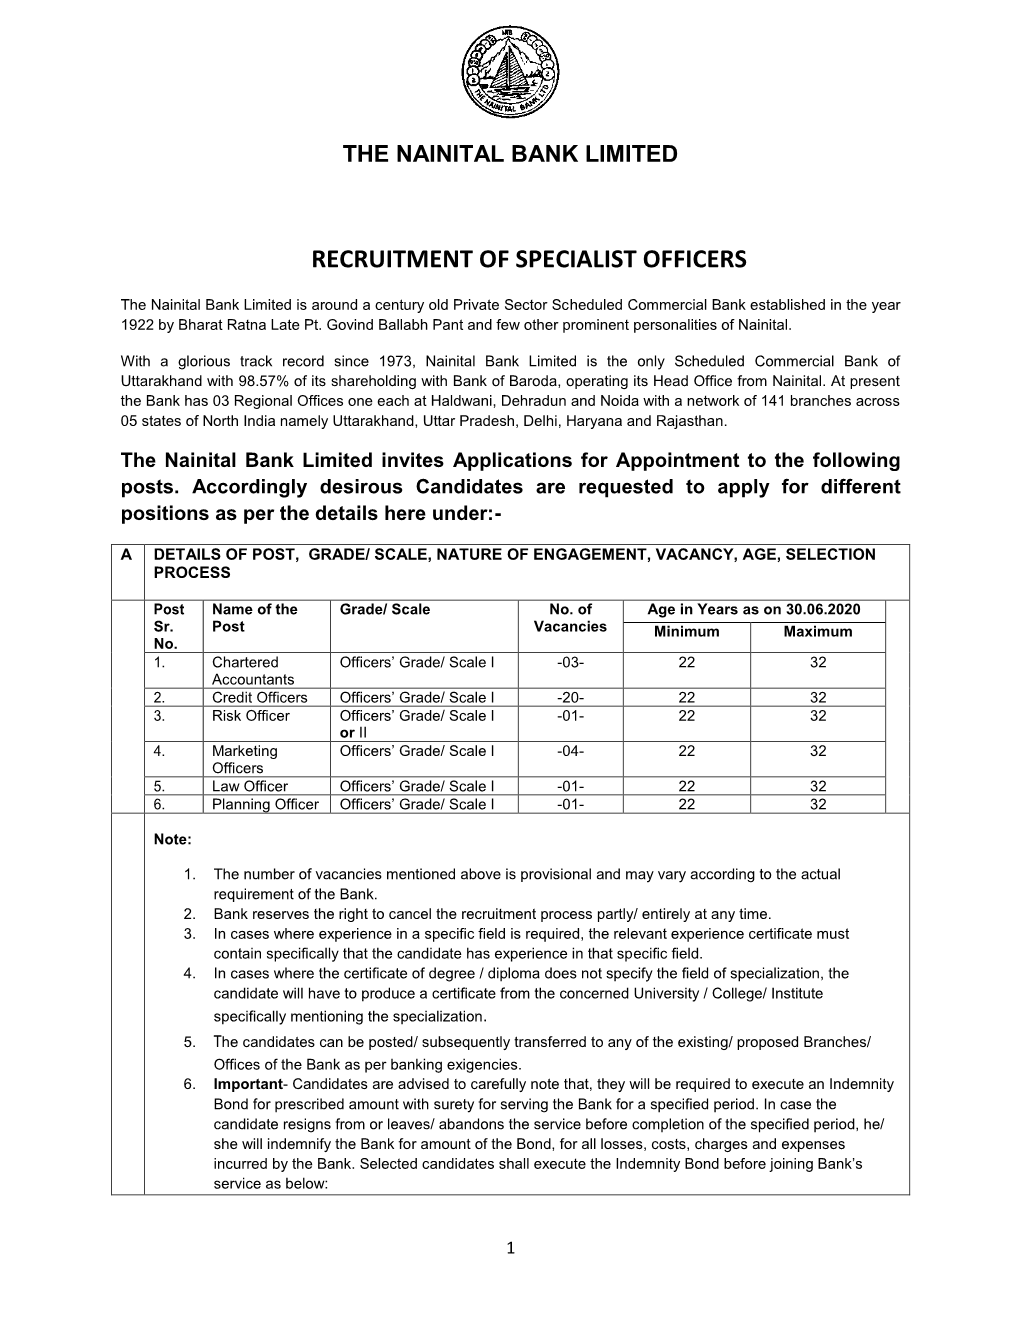 Recruitment of Specialist Officers